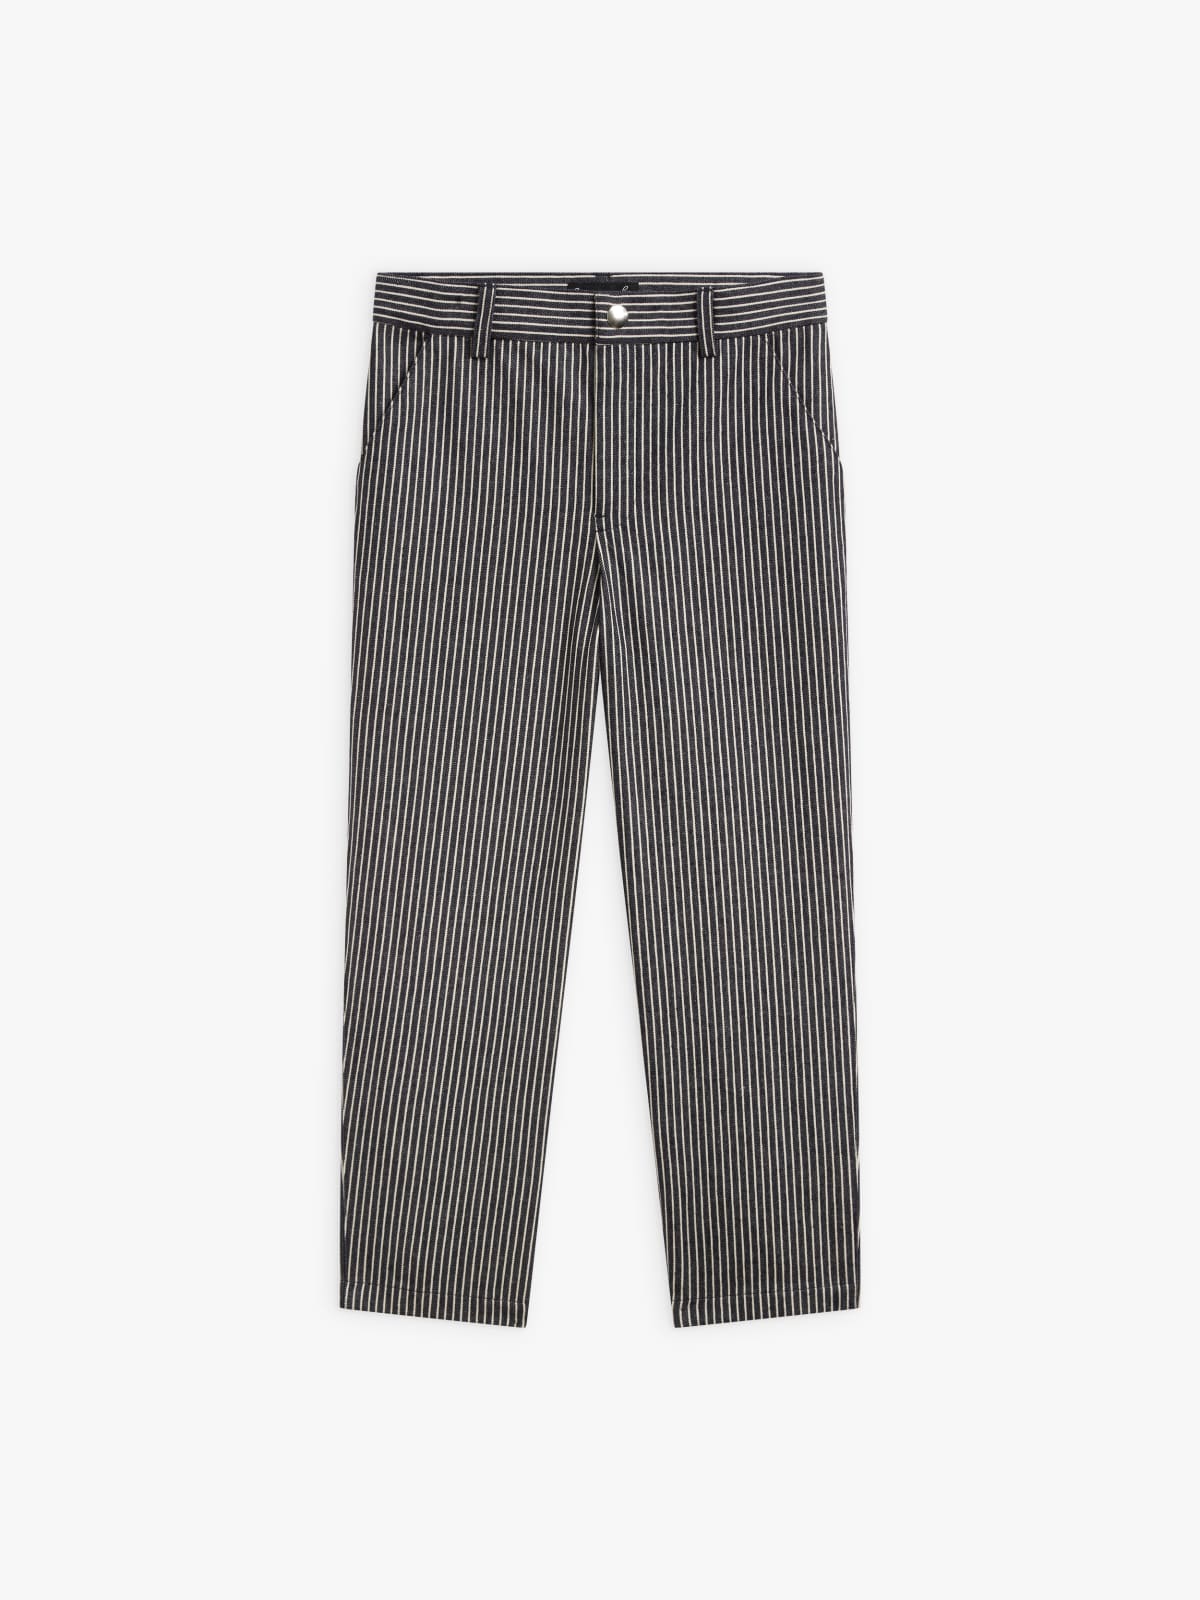 blue cotton striped Chino trousers